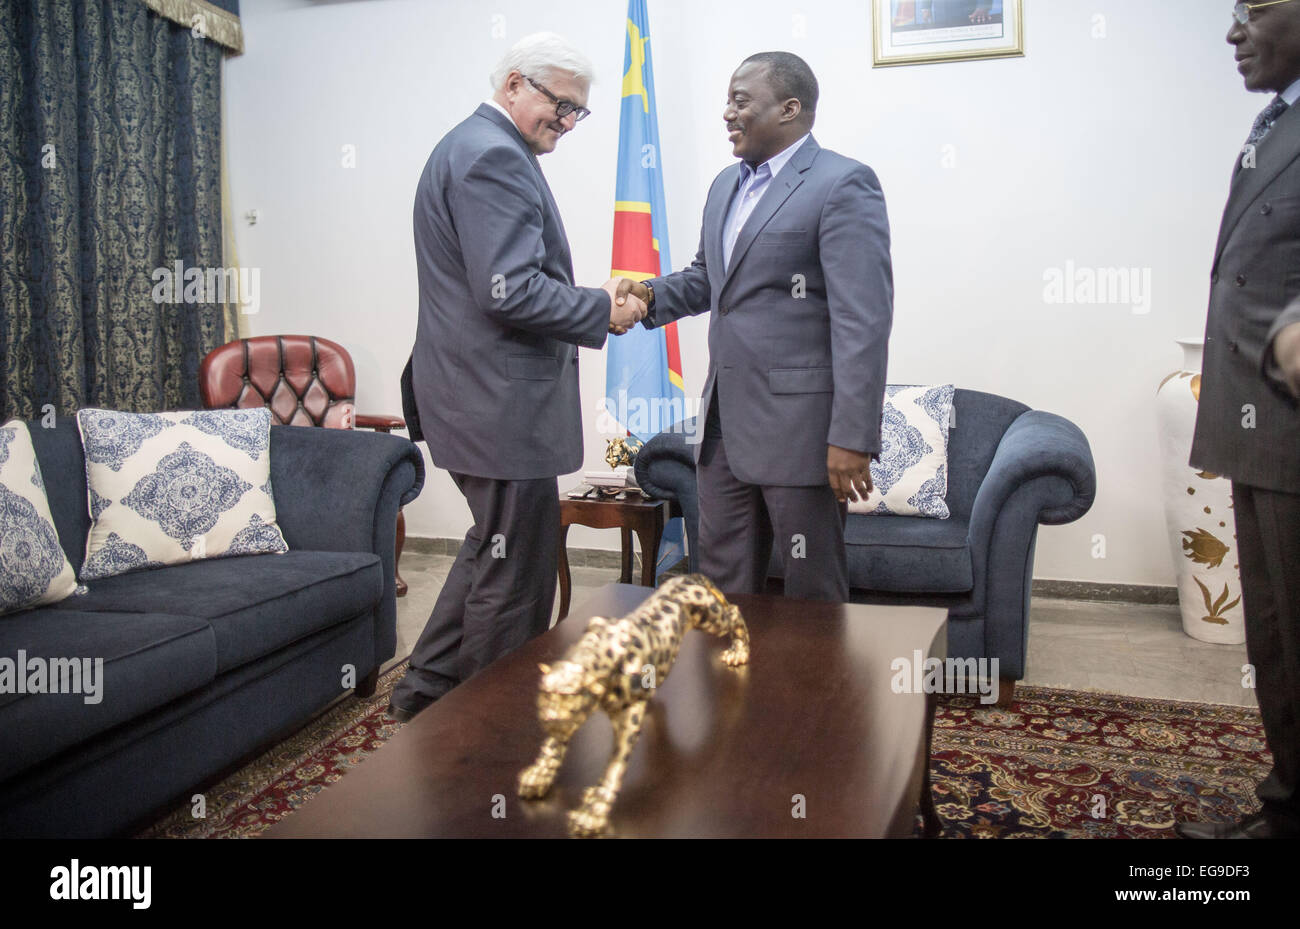 German Foreign Minister Steinmeier (SPD, L) visits the President of the Democratic Republic of Congo, Joseph Kabila Kabange, in Kinshasa, Democratic Republic of Congo, 19 February 2015. Steinmeier is on a fgour-day trip visiting counrtires in Africa. Photo: Michael Kappeler/dpa Stock Photo